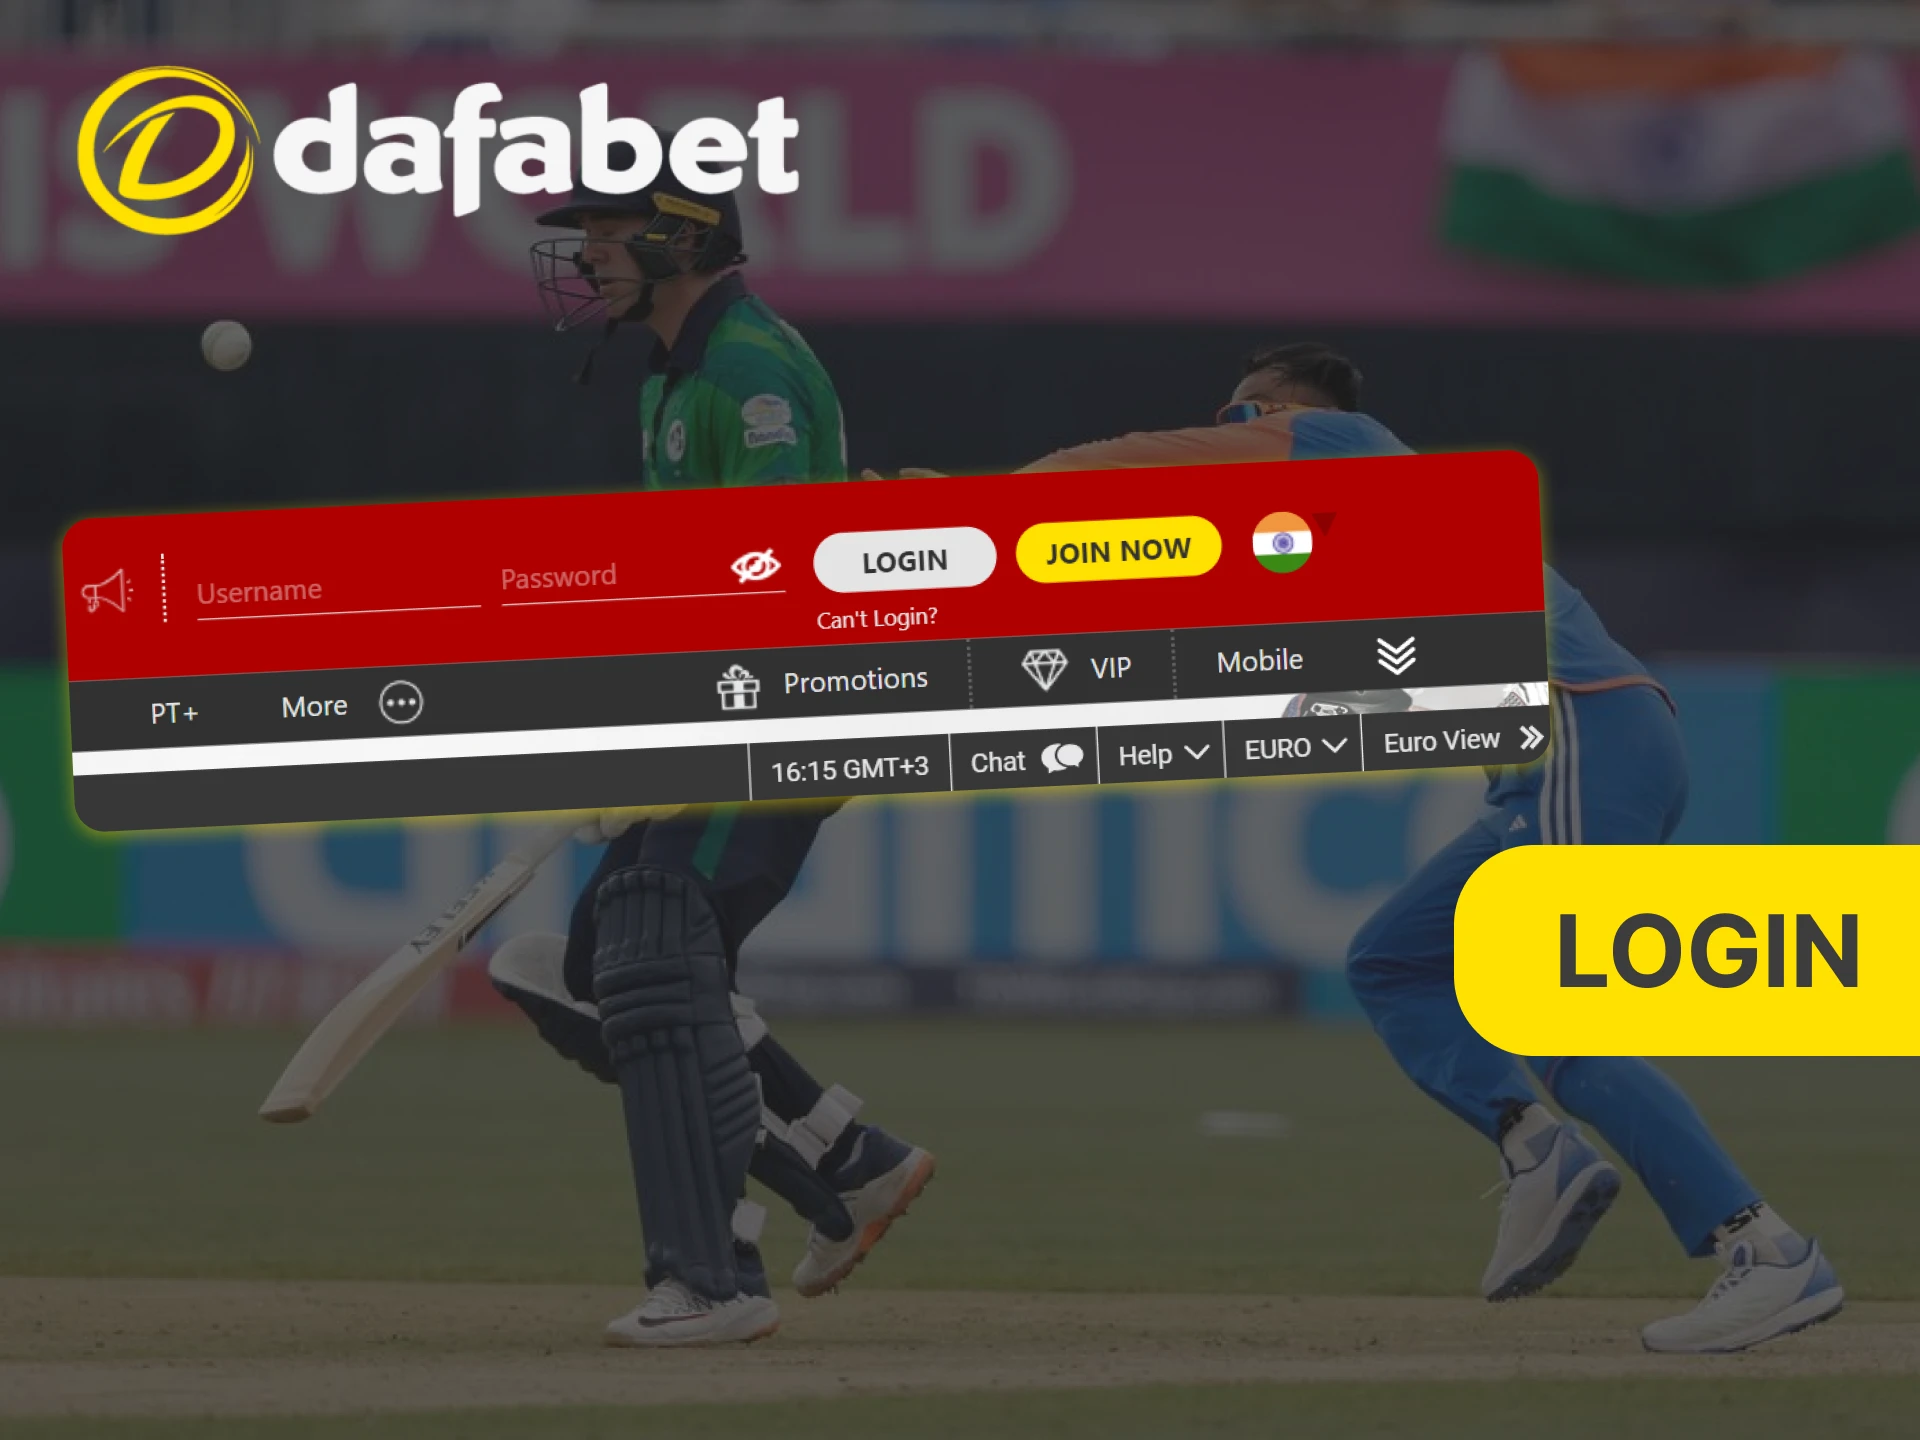 Find out how to log into your personal account on Dafabet.